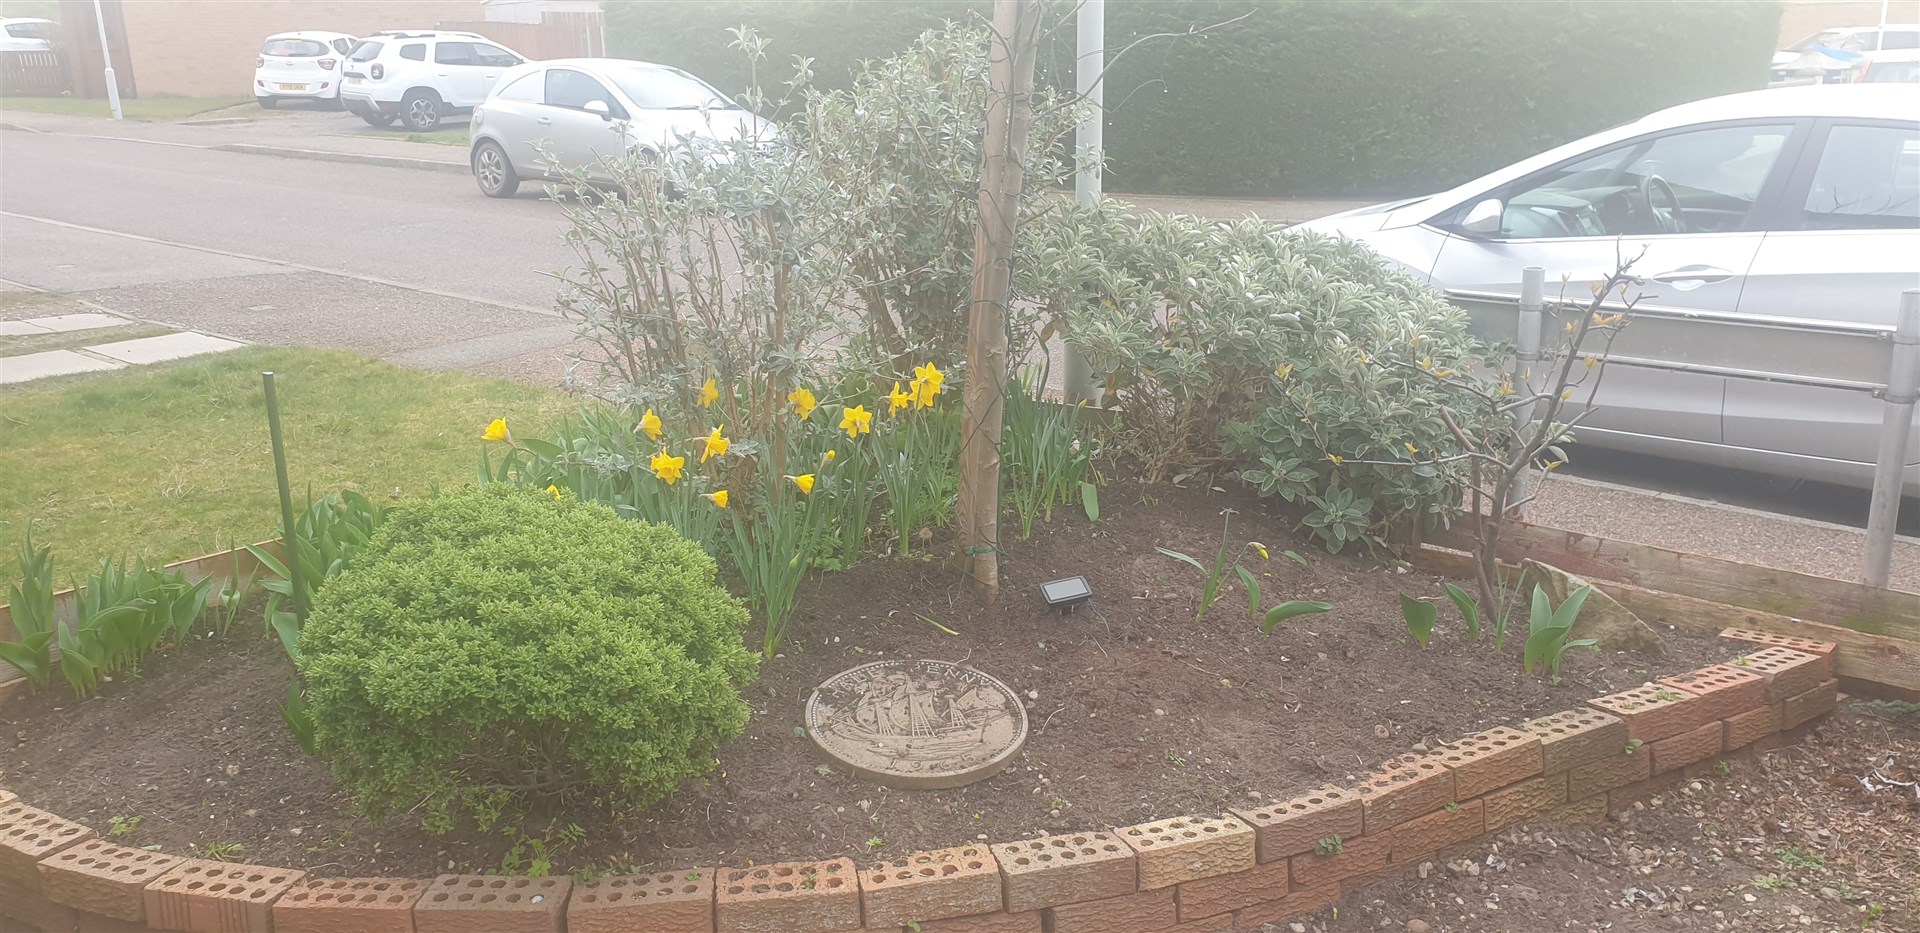 Some daffodils make their appearance of the season.